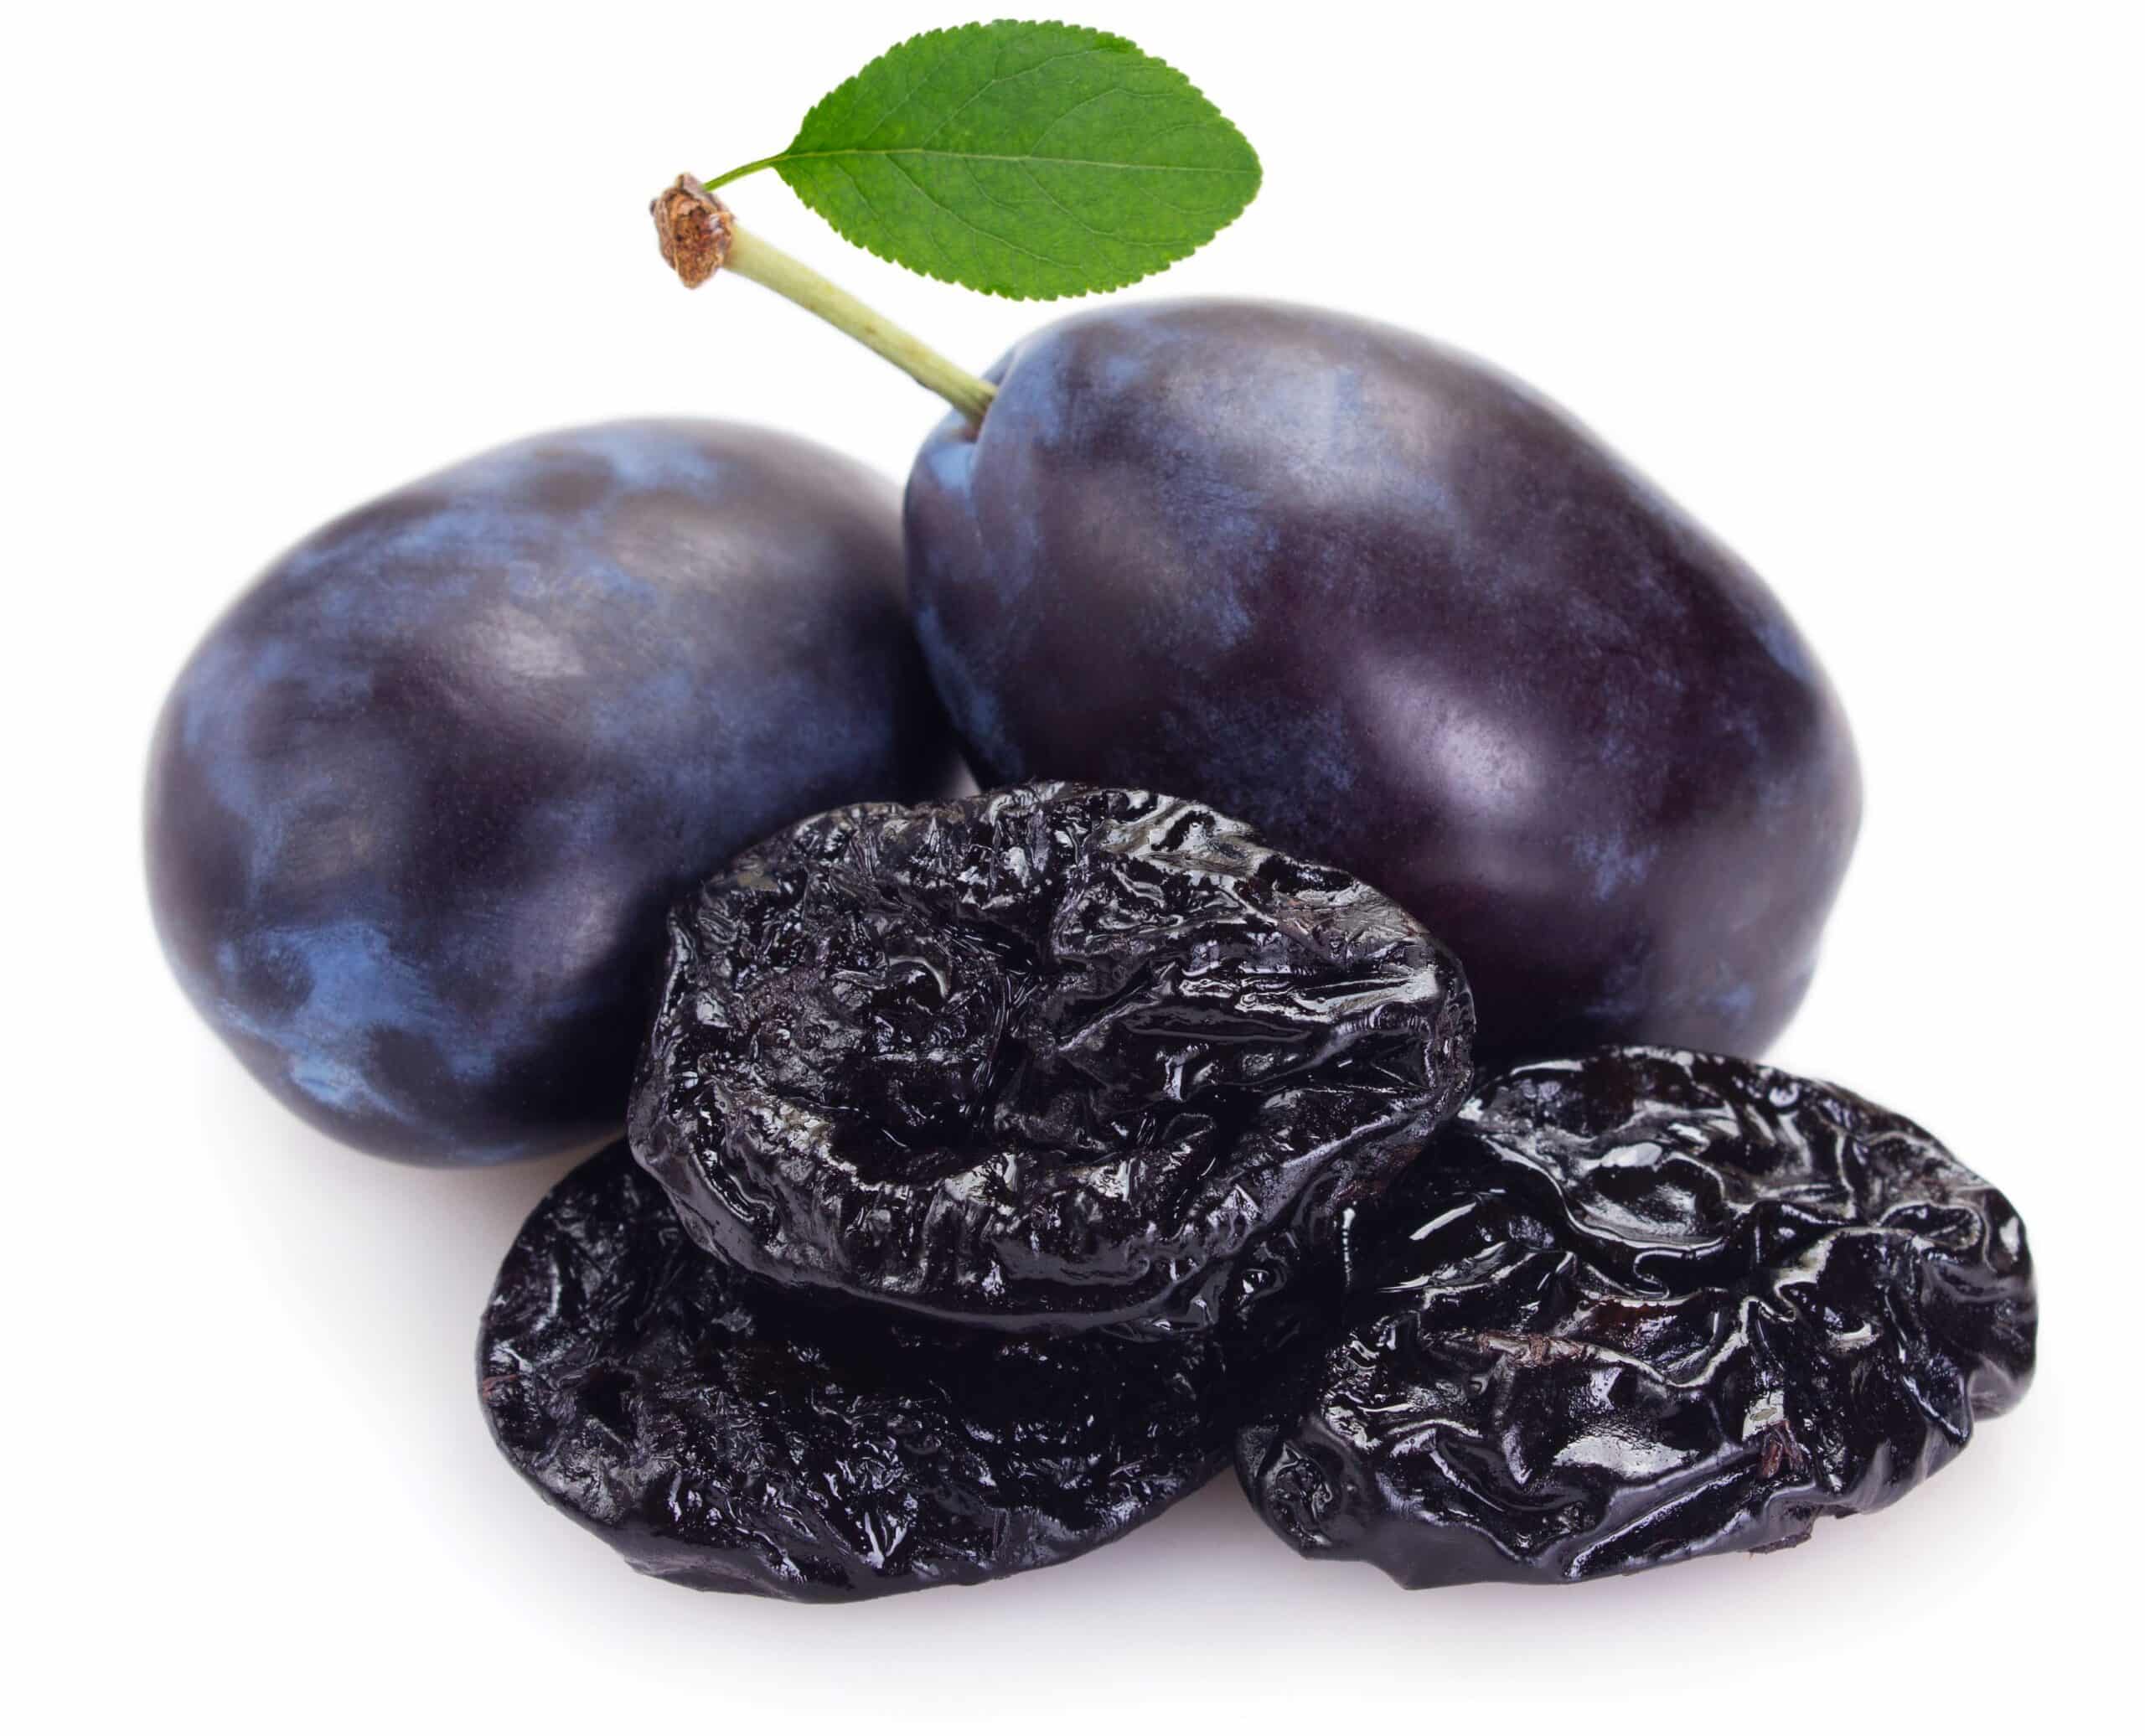 Prunes May Help Reduce Inflammation And Support Bone Health